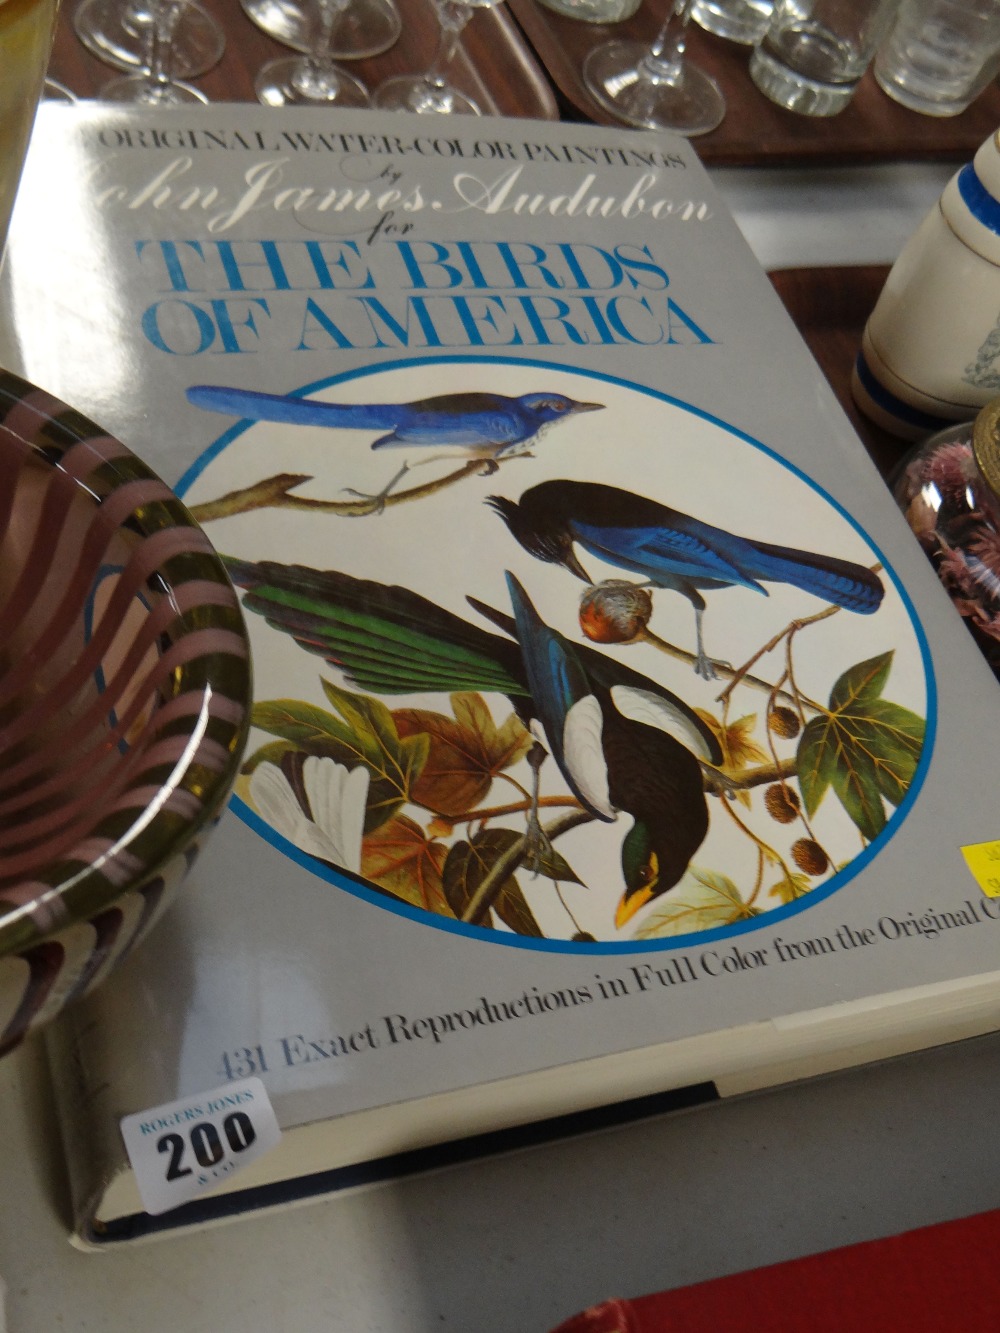 A volume of 'The Original Watercolour Paintings' by John James Audubon for The Bird's of America